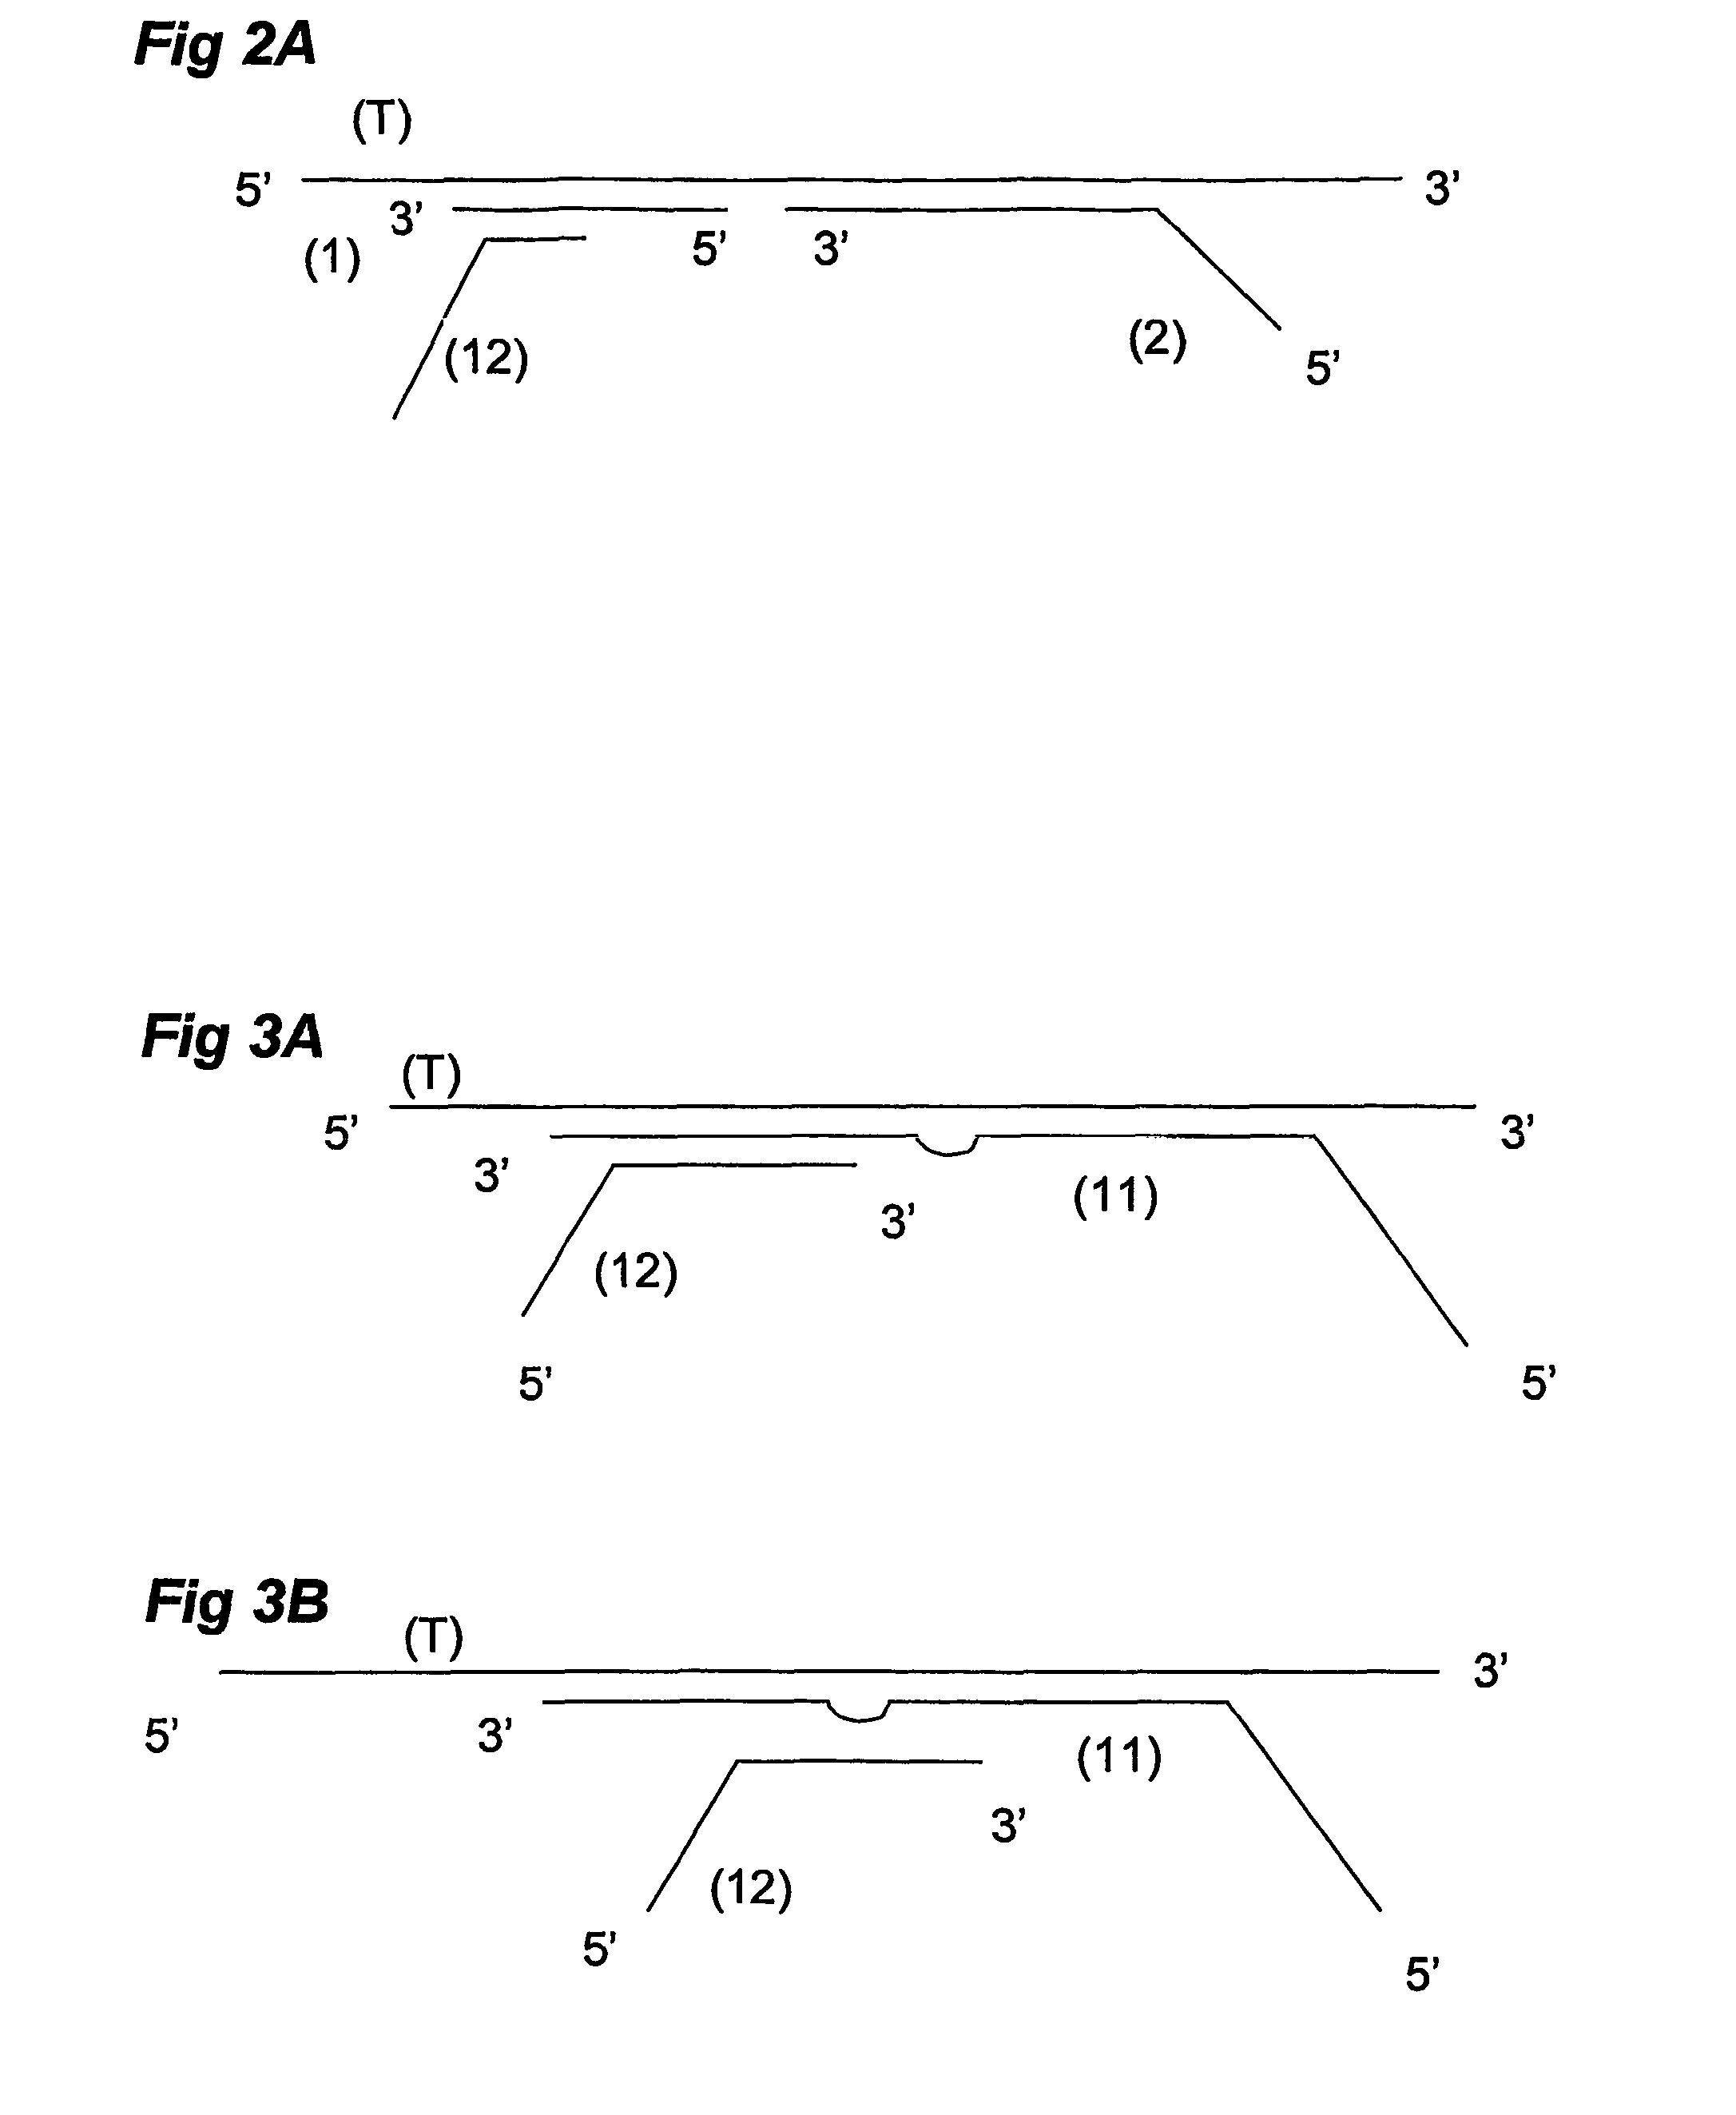 Ola-based methods for the detection of target nucleic avid sequences